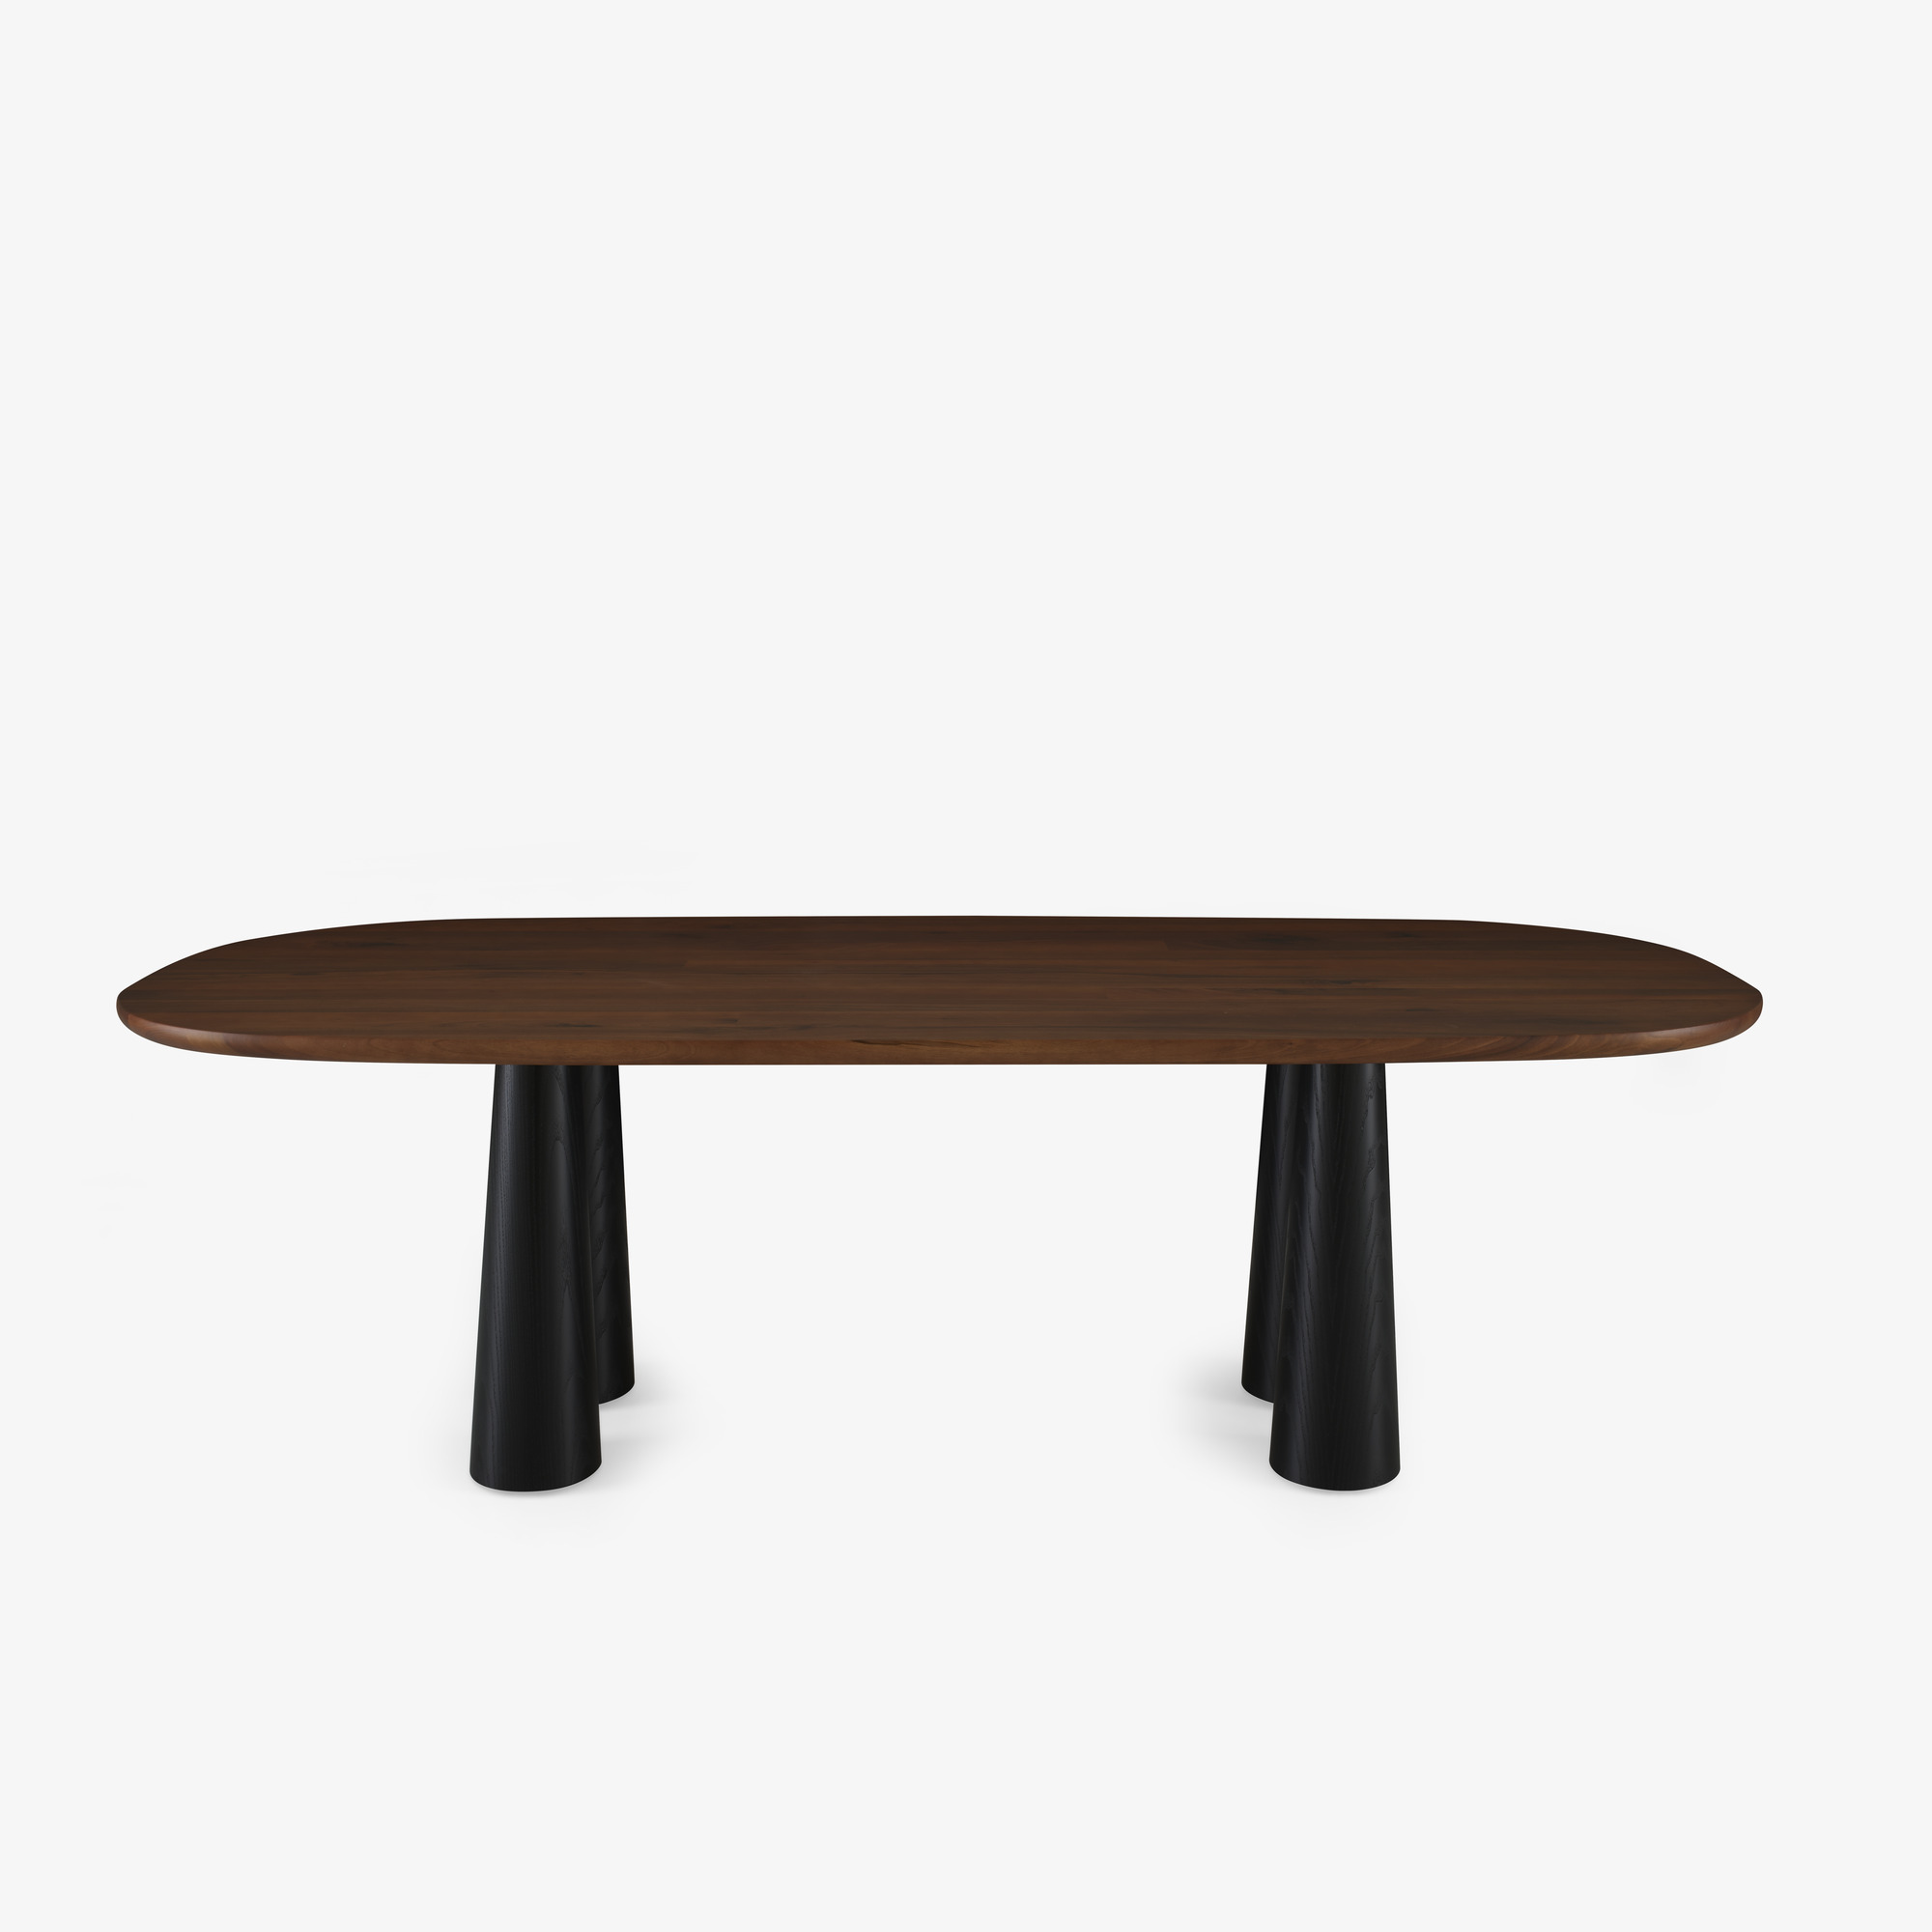 Image DINING TABLE WALNUT BASE IN BLACK STAINED ASH